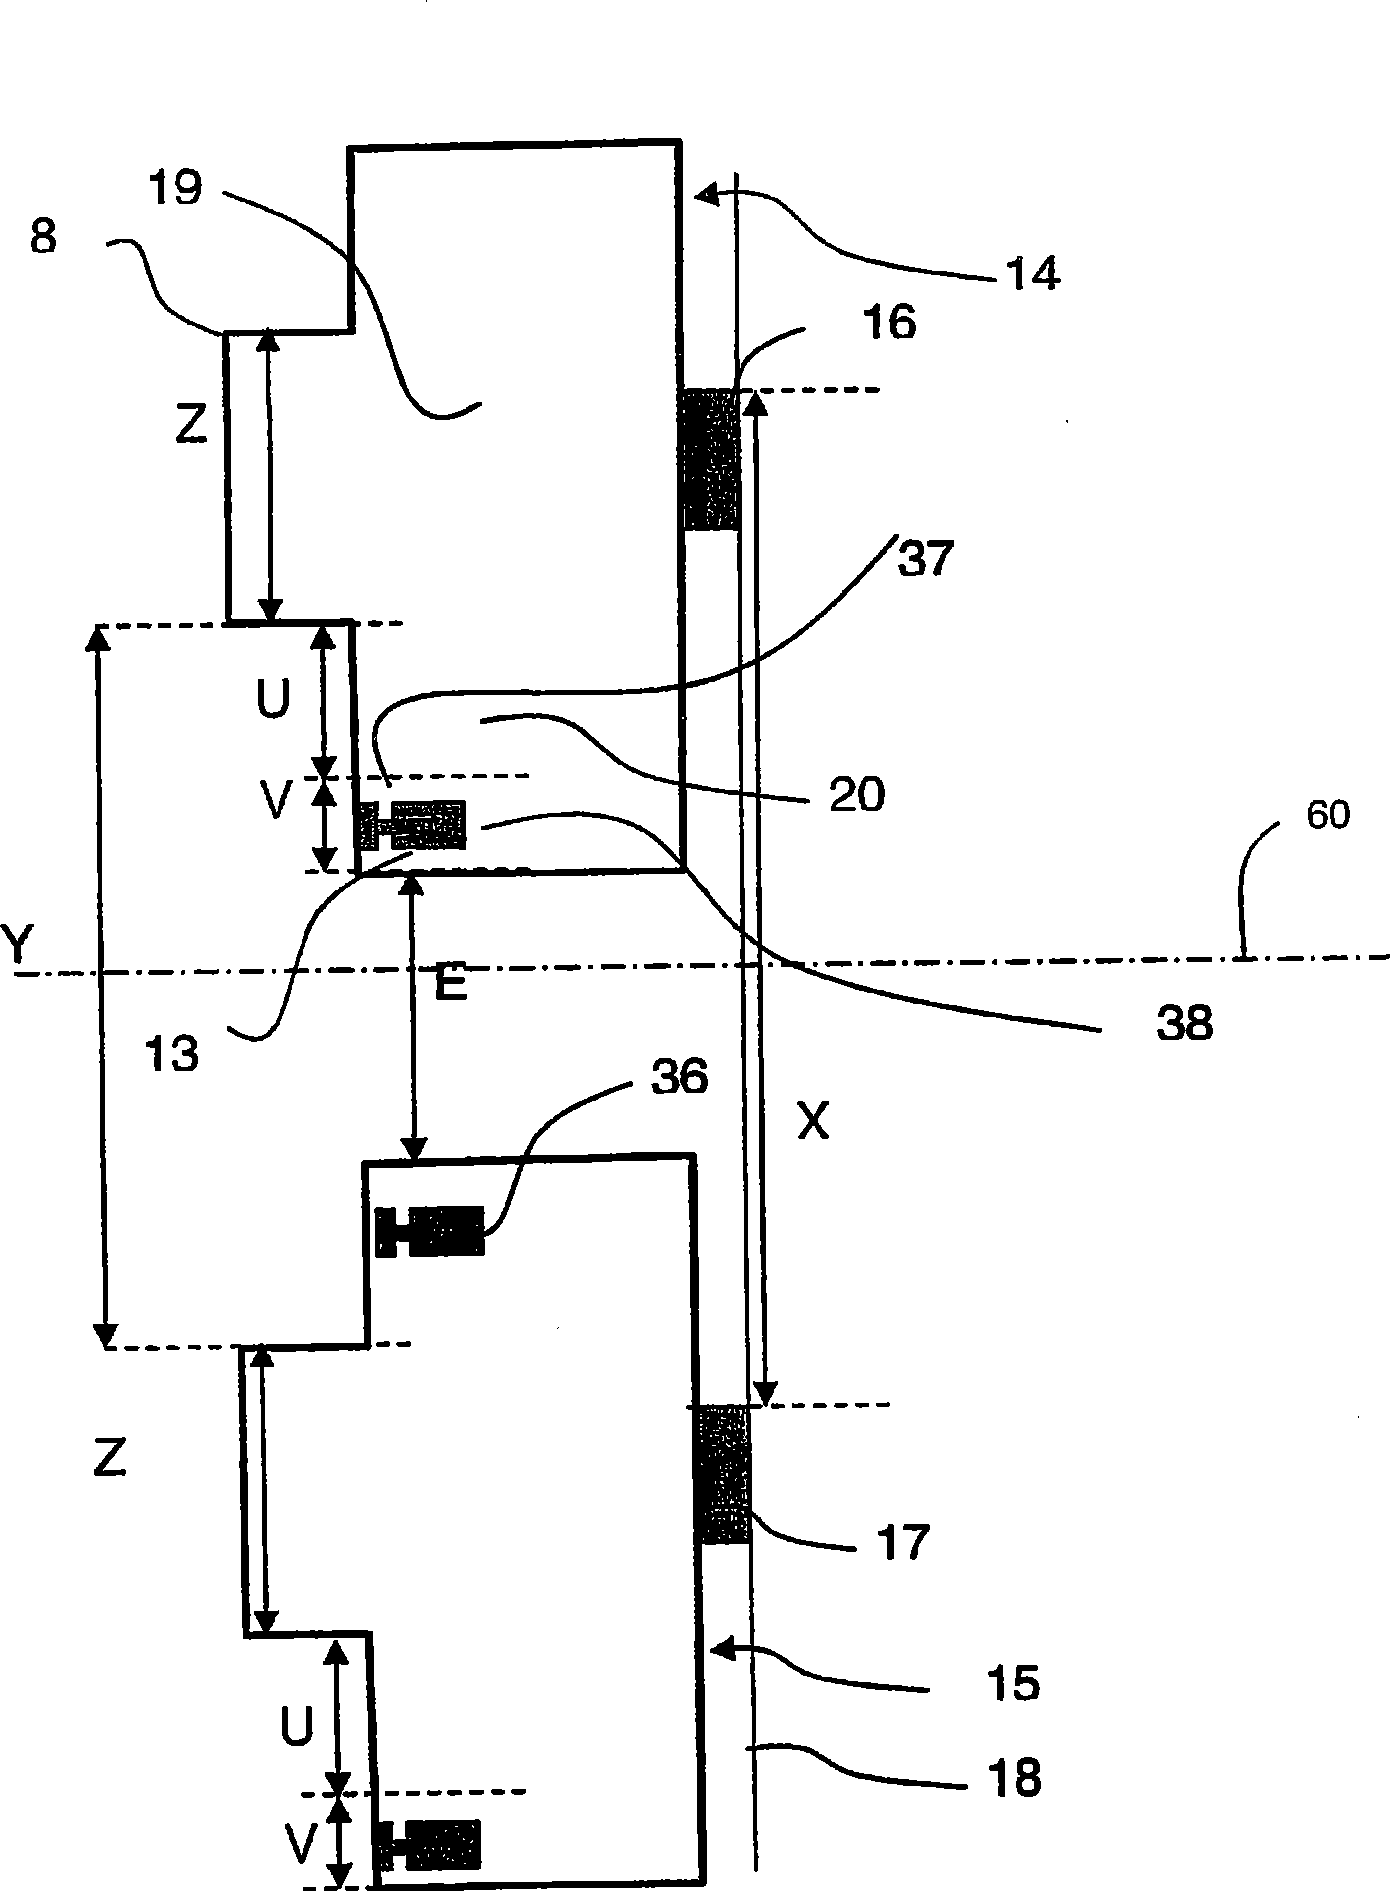 Modular electric protection device comprising an additional electric function such as the differential protection function